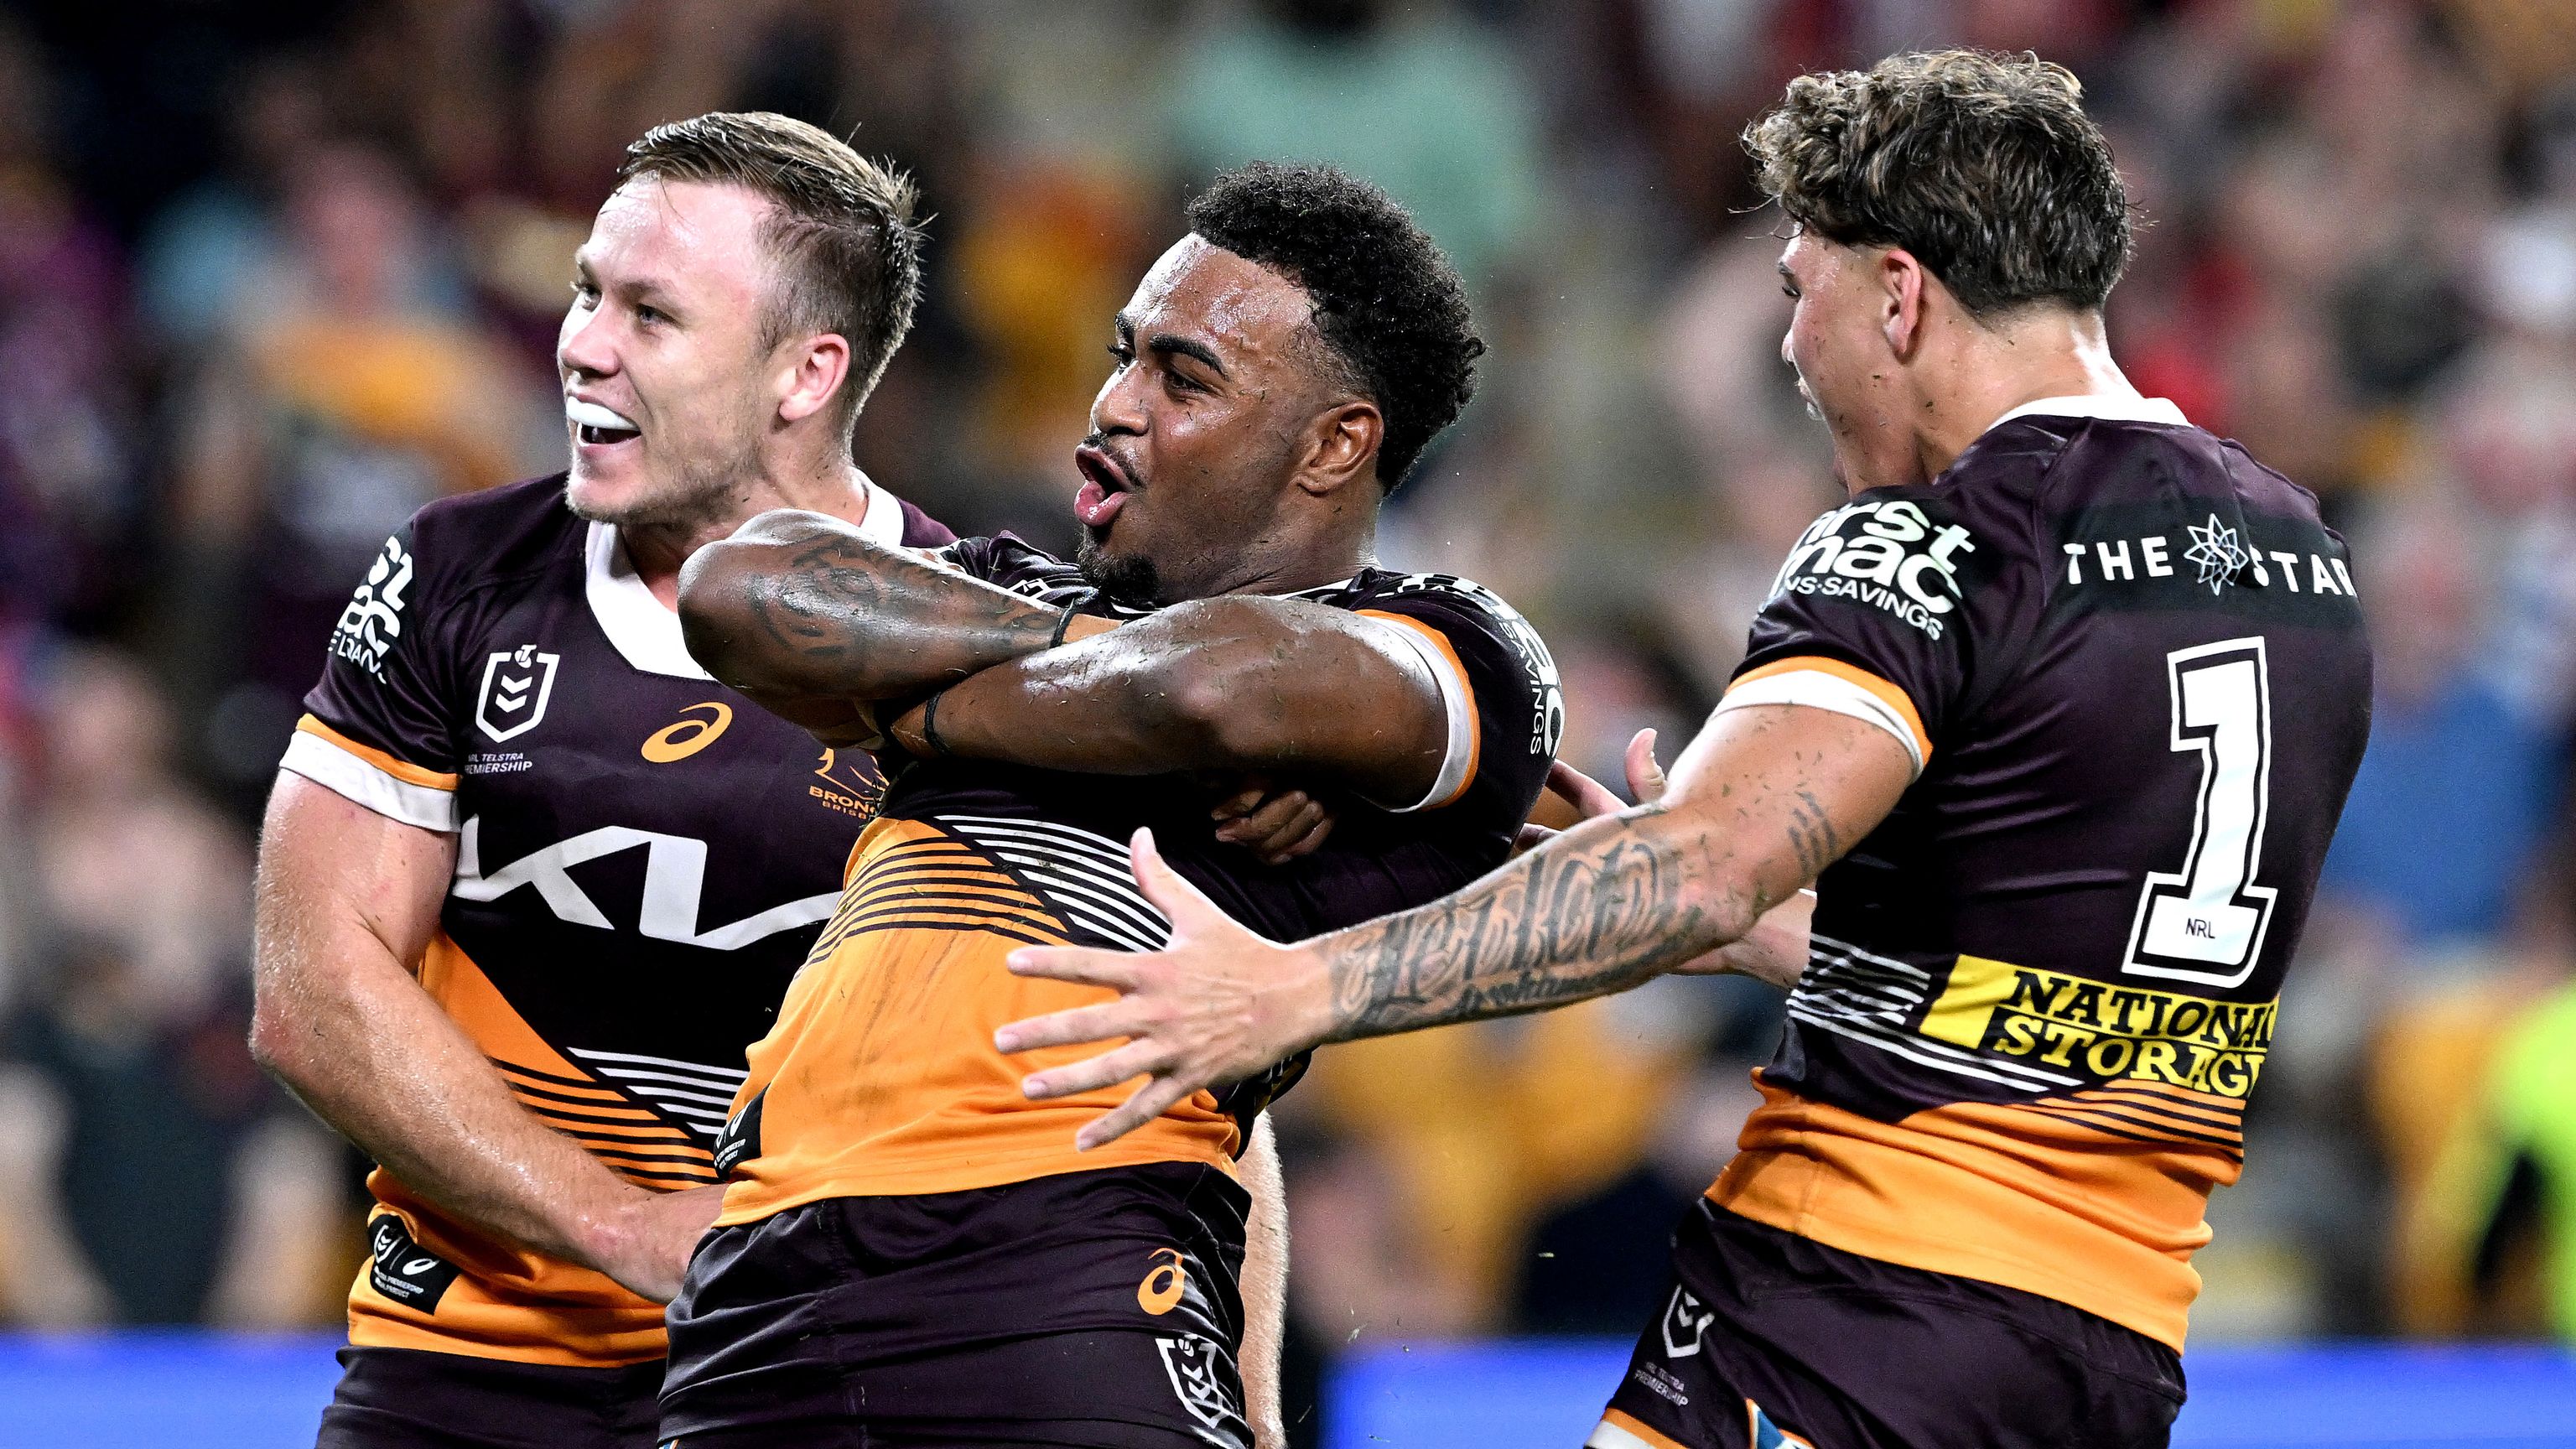 Ezra Mam of the Broncos celebrates scoring a try during the round three NRL match between Brisbane Broncos and St George Illawarra Dragons at Suncorp Stadium on March 18, 2023 in Brisbane, Australia. (Photo by Bradley Kanaris/Getty Images)